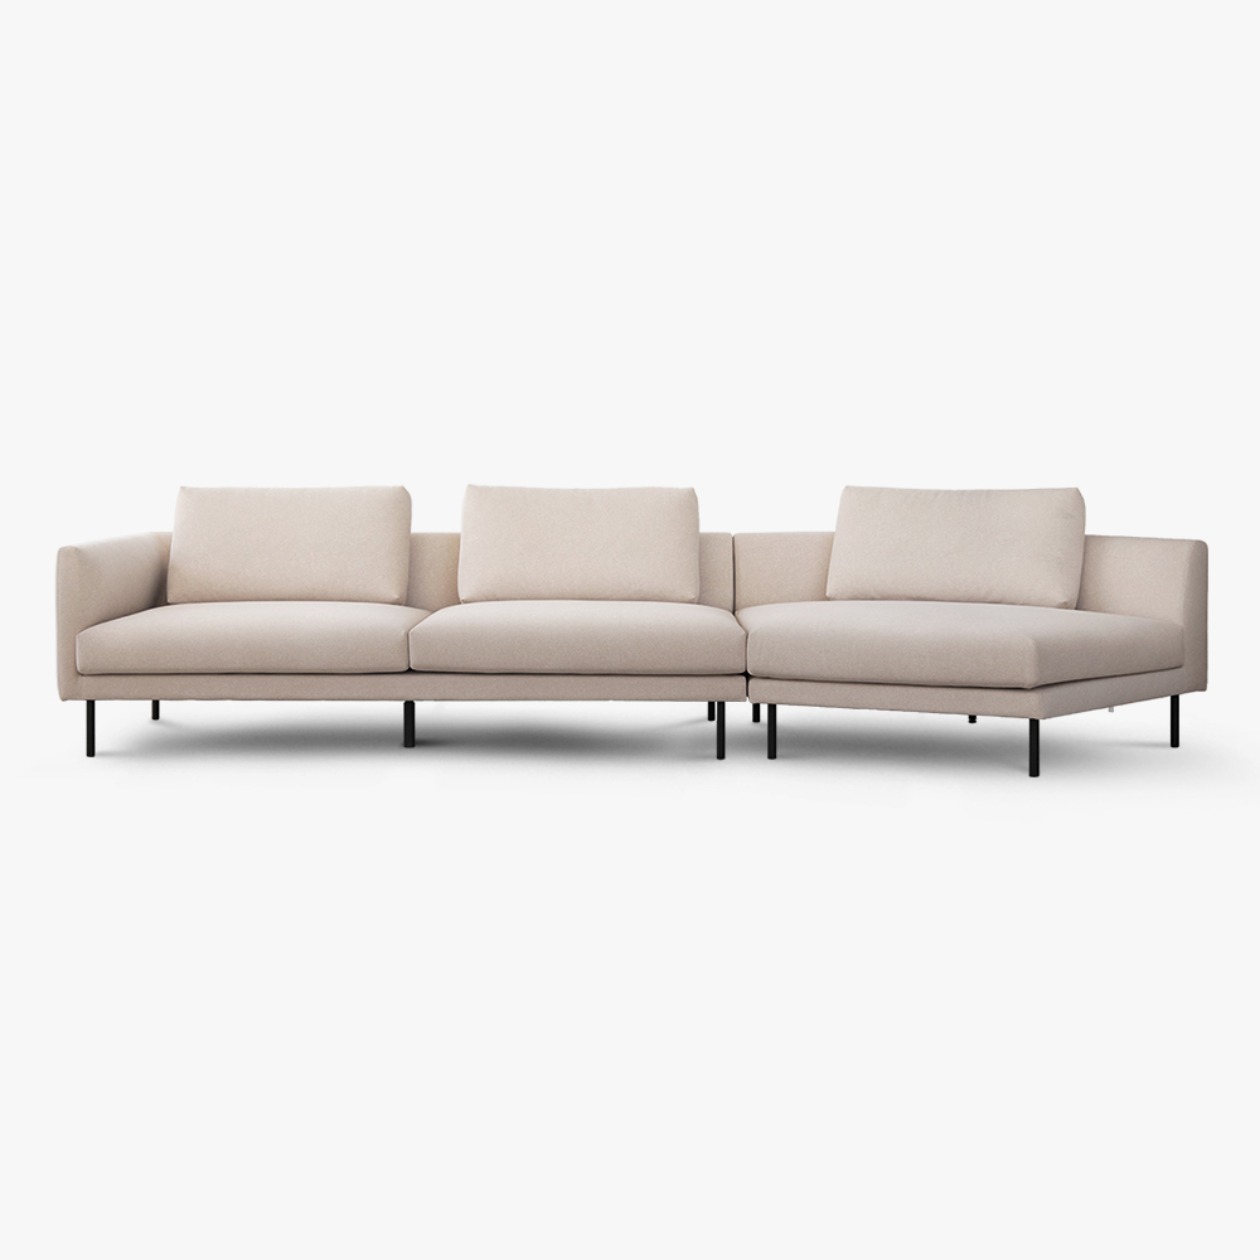 LINEAR SOFA COUCH